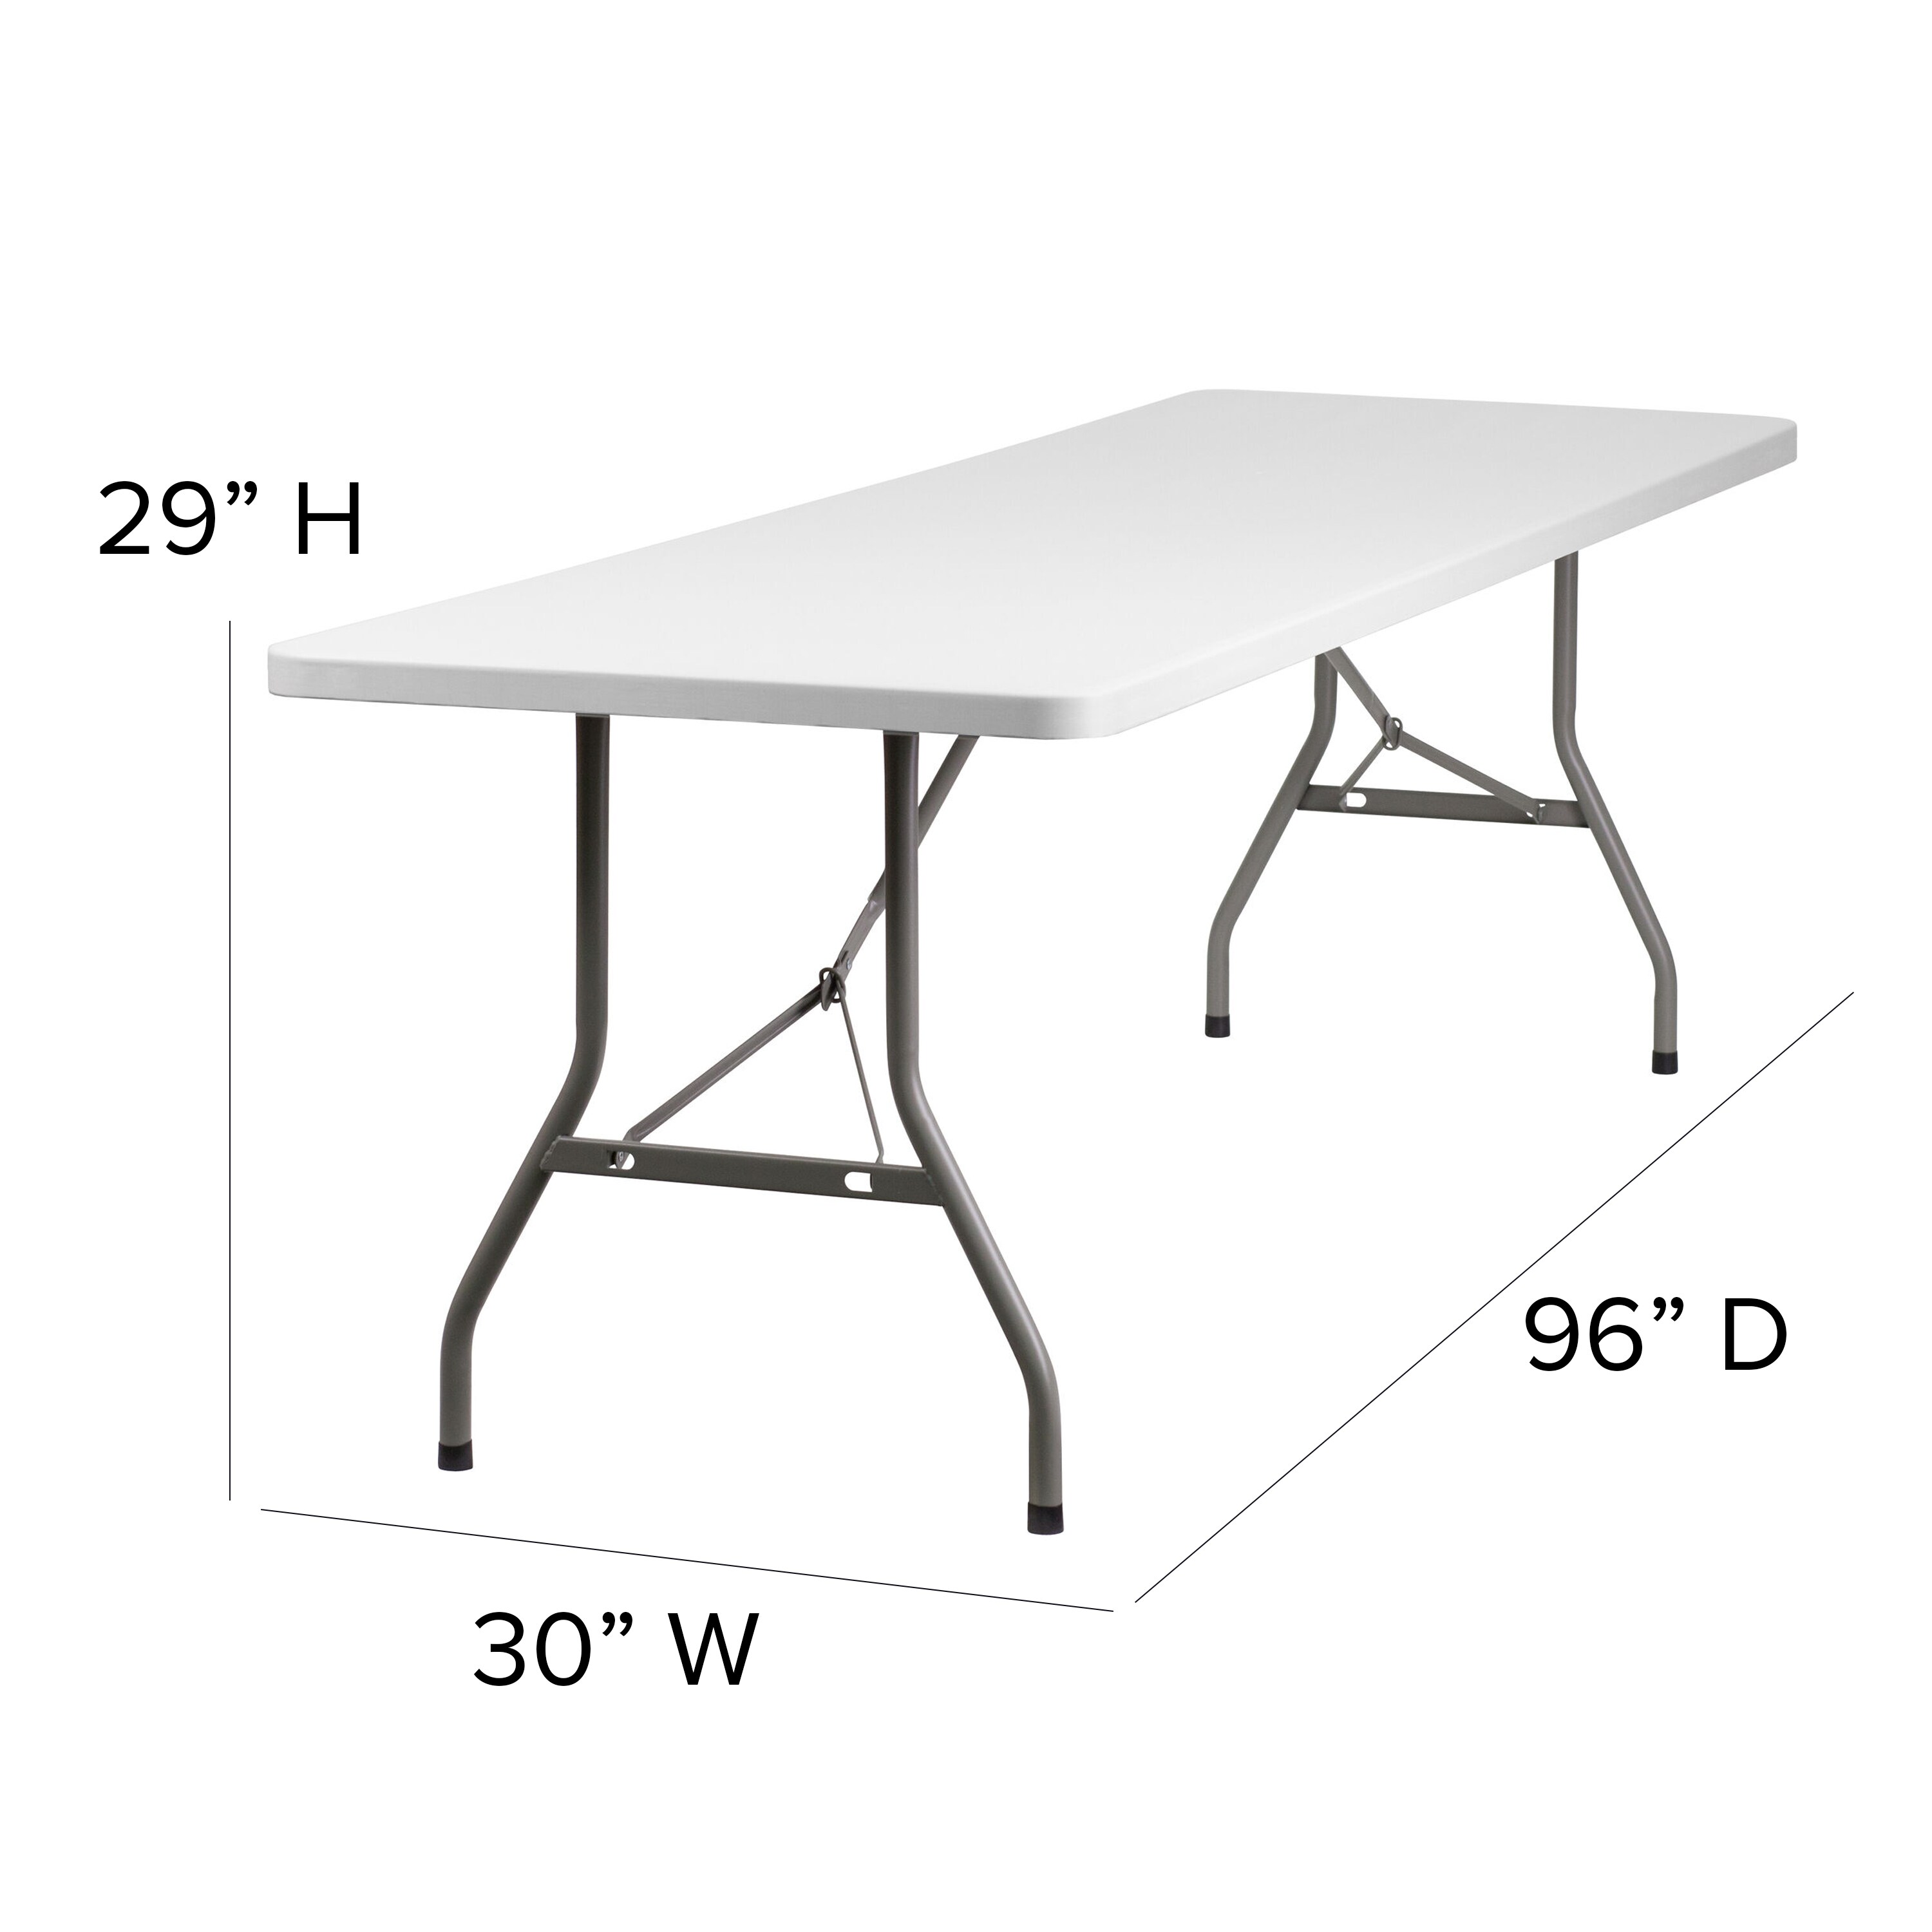 Folding Banquet Table, What Are The Dimensions Of An 8 Foot Banquet Table